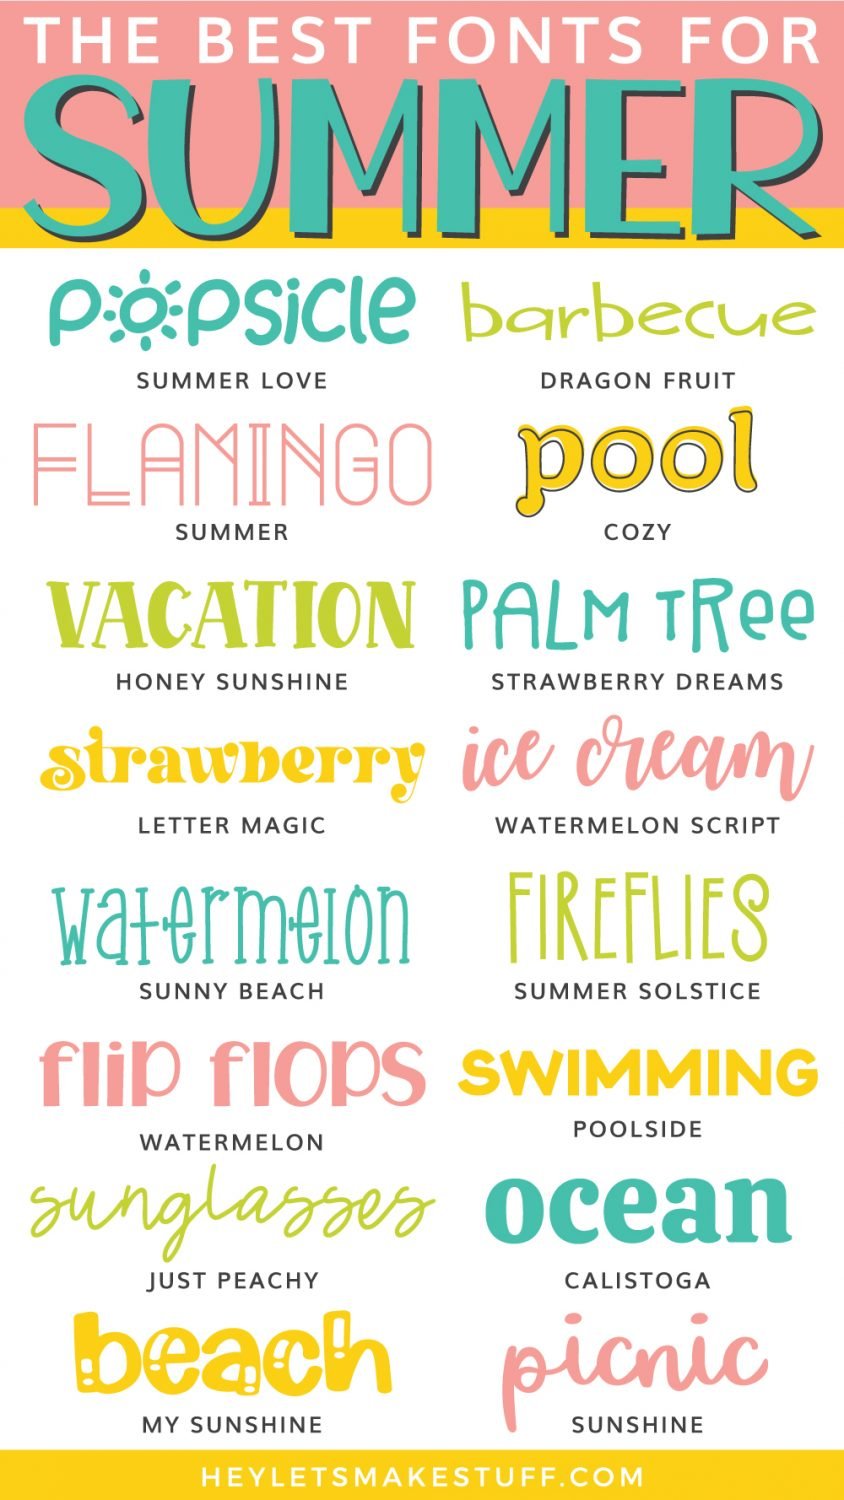 Free and Cheap Summer and Beach Fonts Pin Image